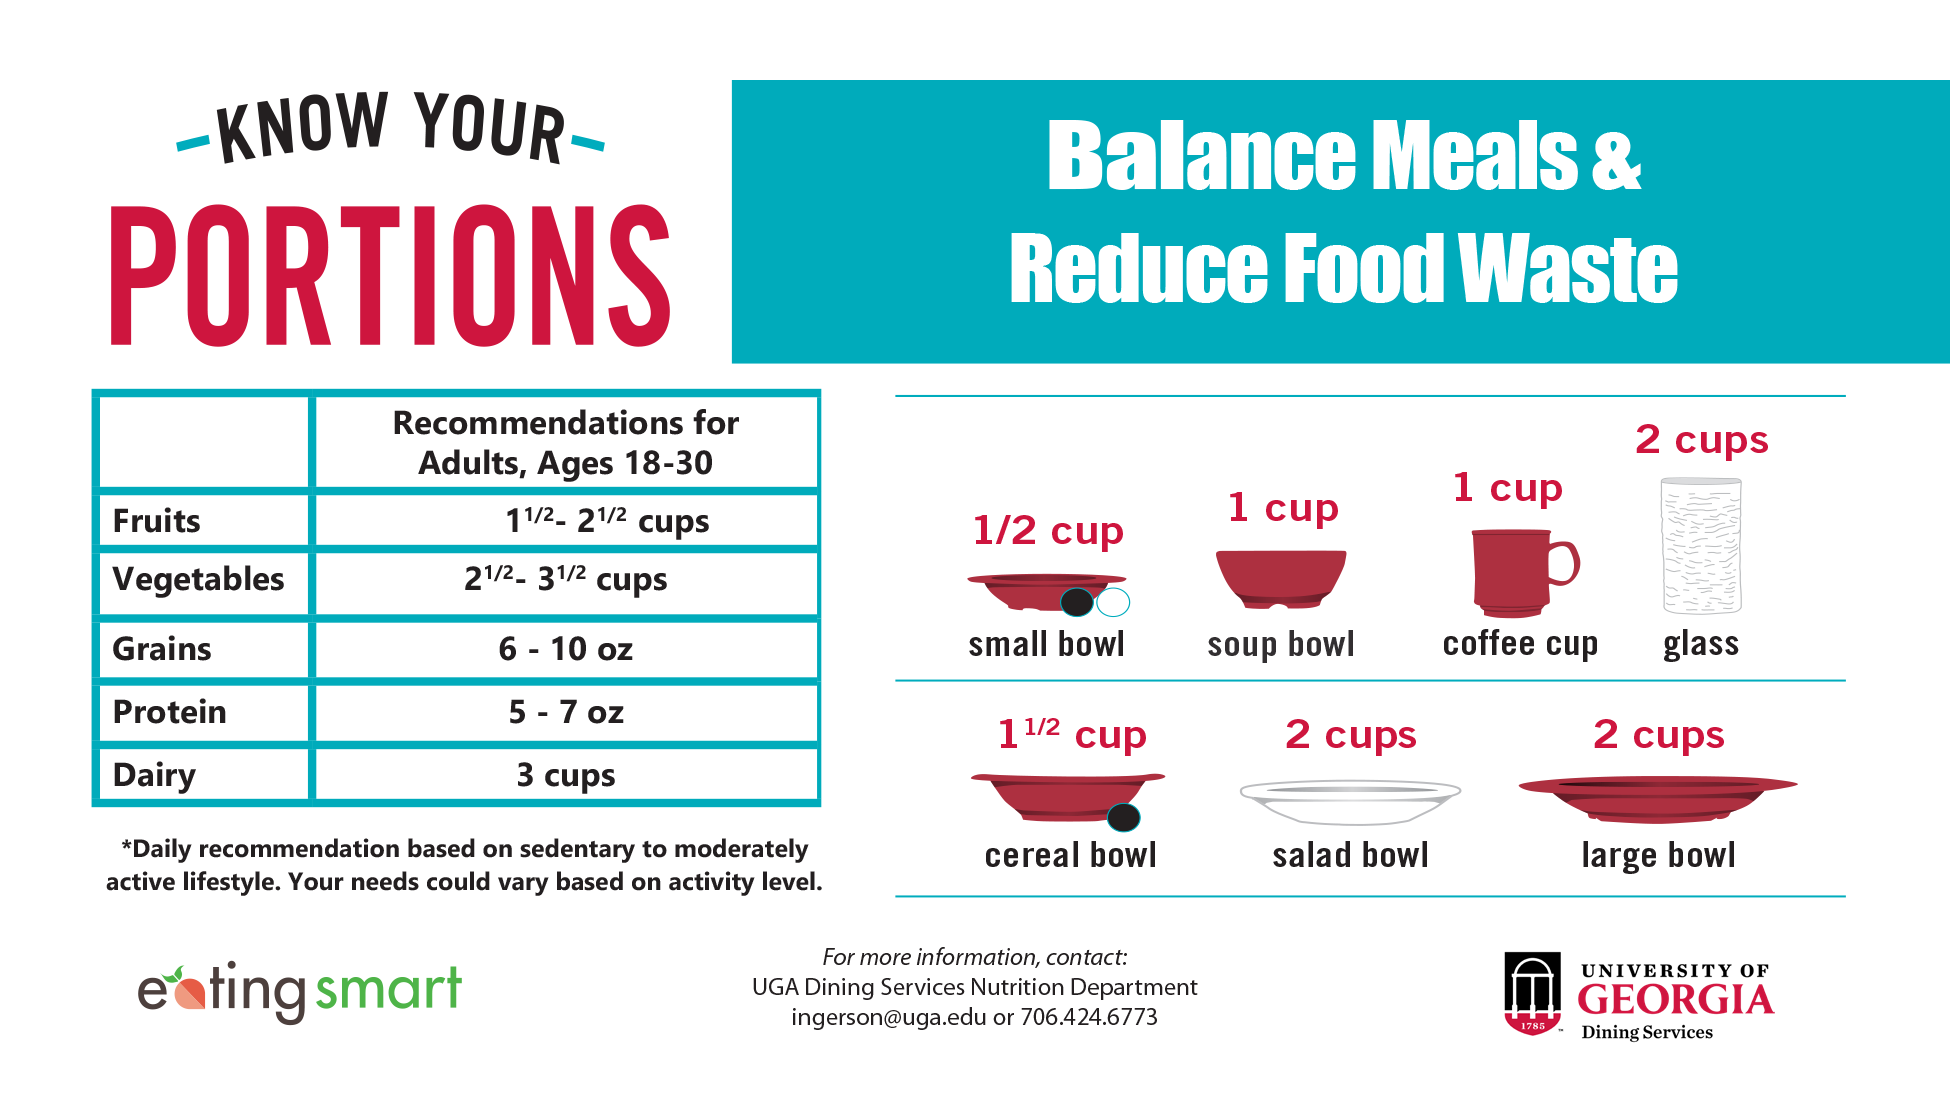 Know your portions. Balance your meals and reduce food waste.